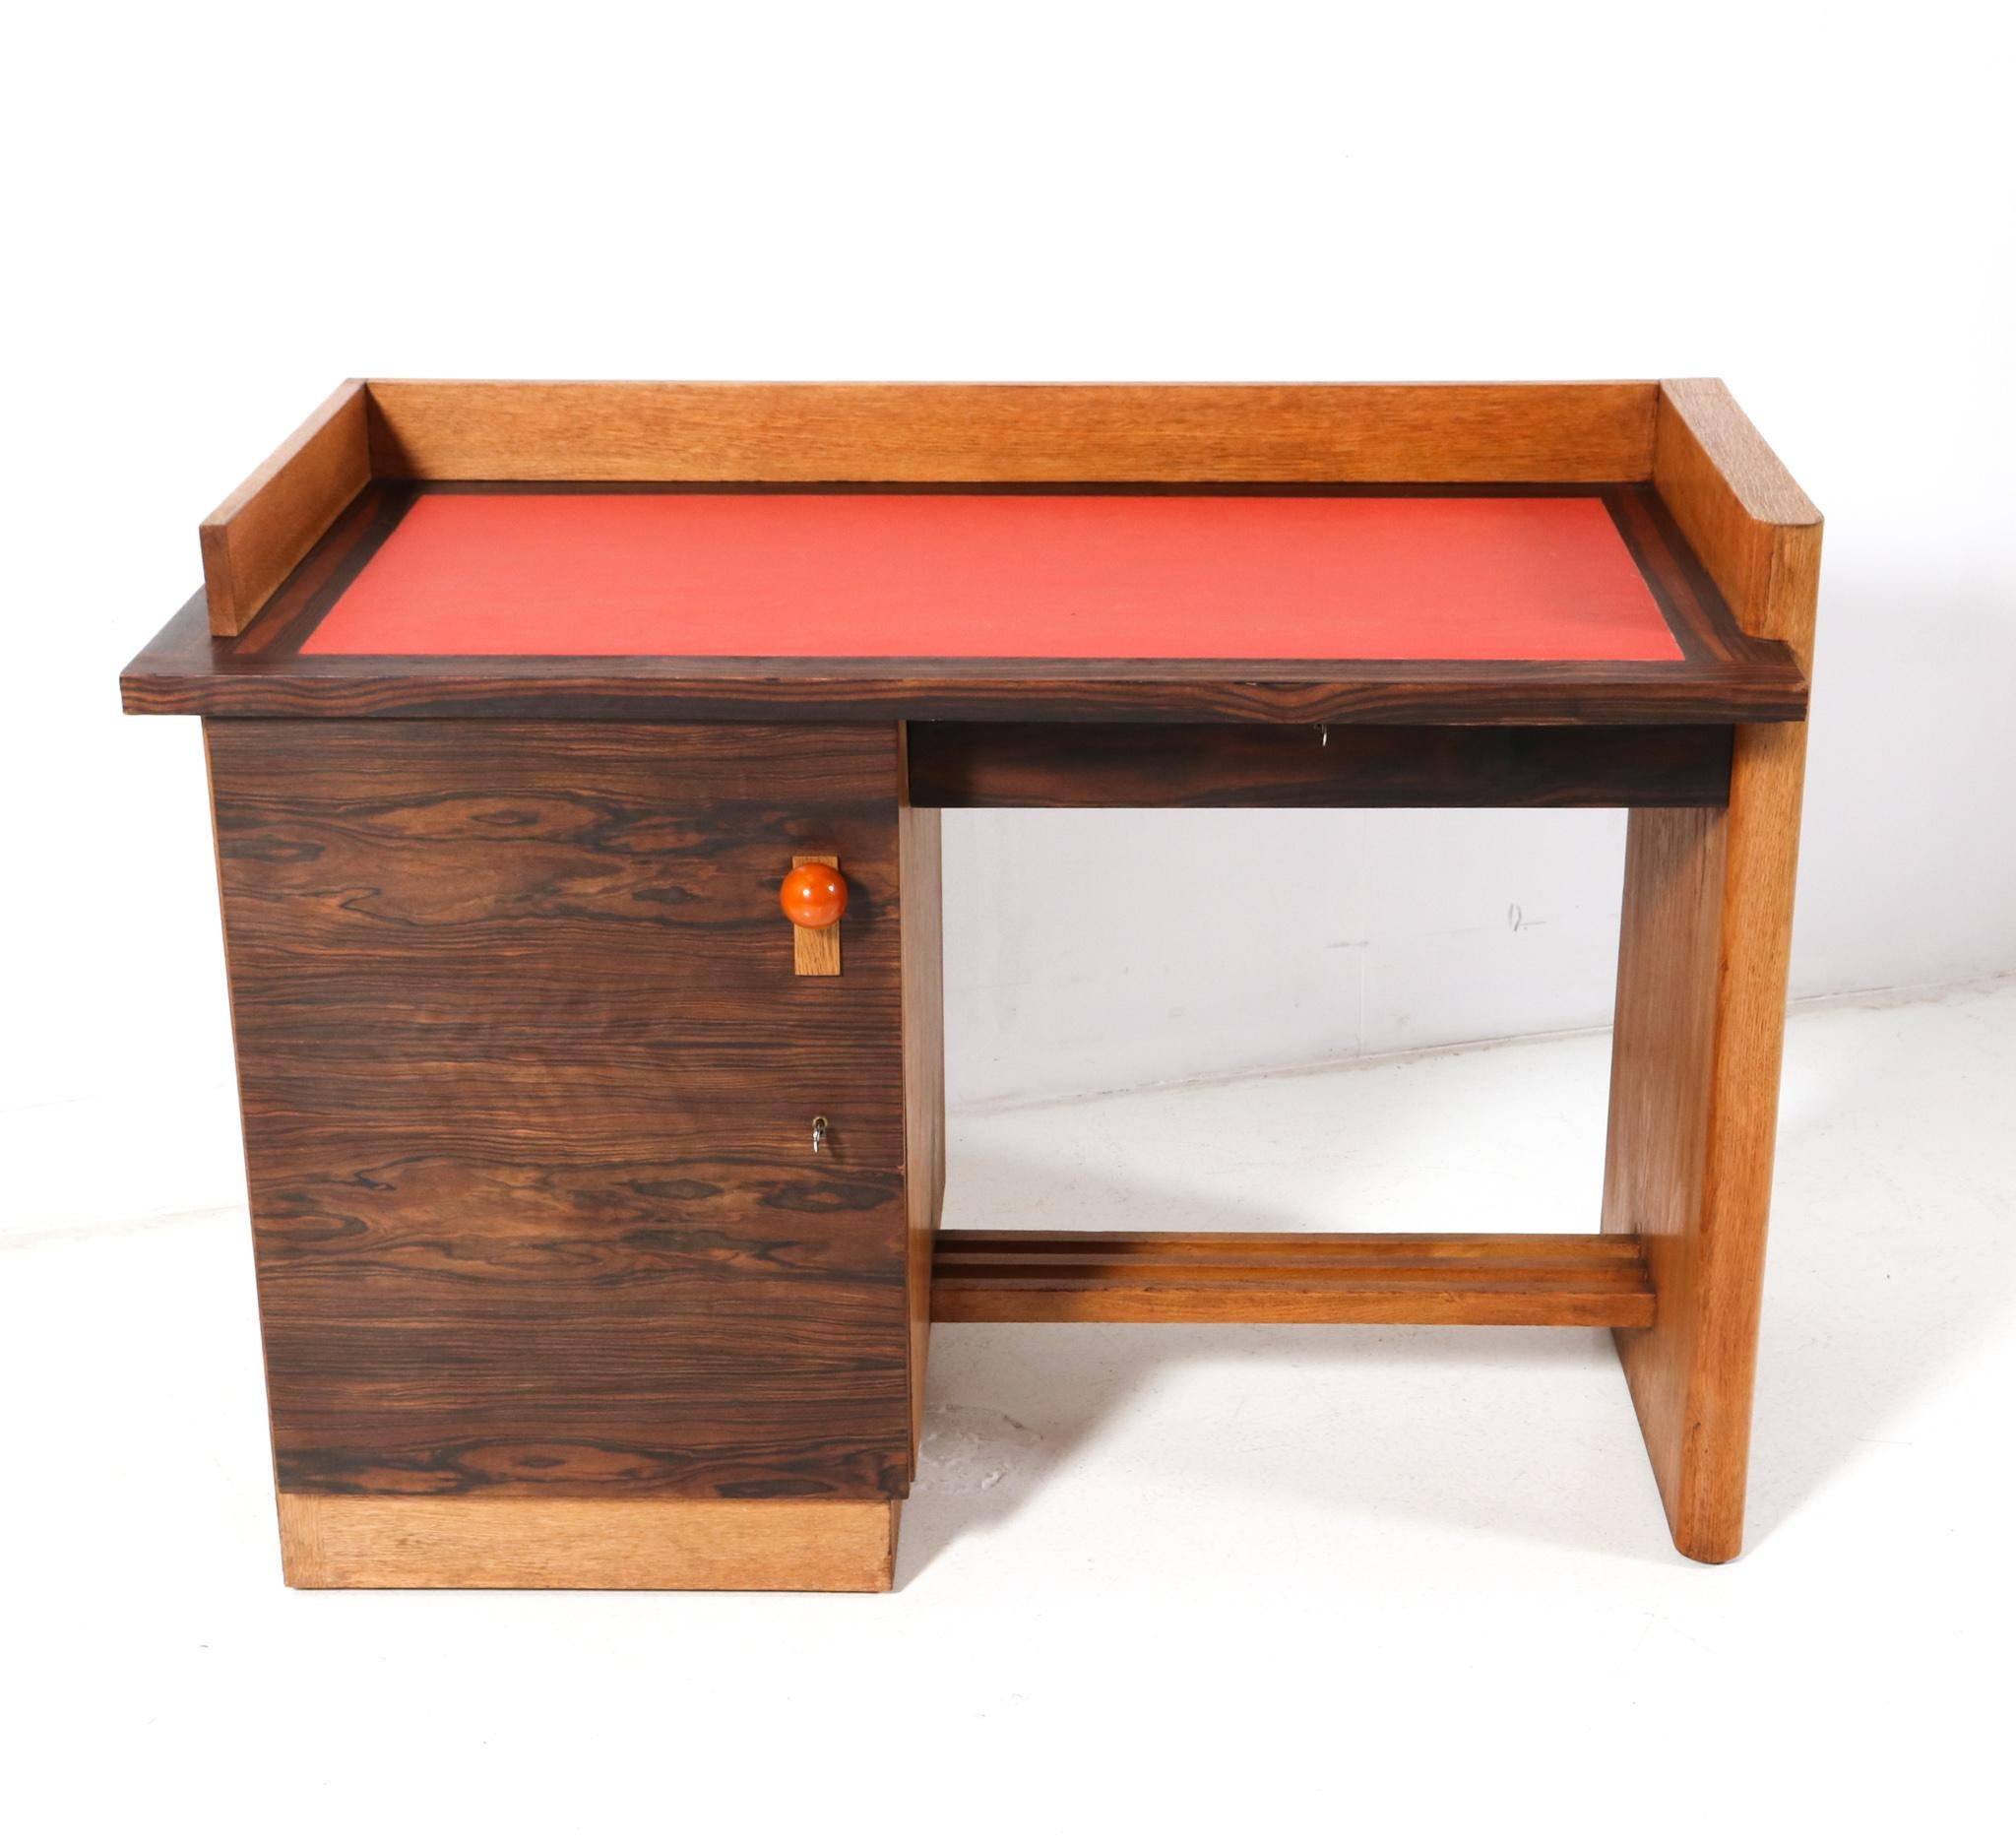 Magnificent and rare Art Deco Modernist small desk.
Design attributed to Jan Brunott.
Striking Dutch design from the 1920s.
Solid oak and original oak veneered base with new faux leather writing section.
Original macassar ebony veneered door and